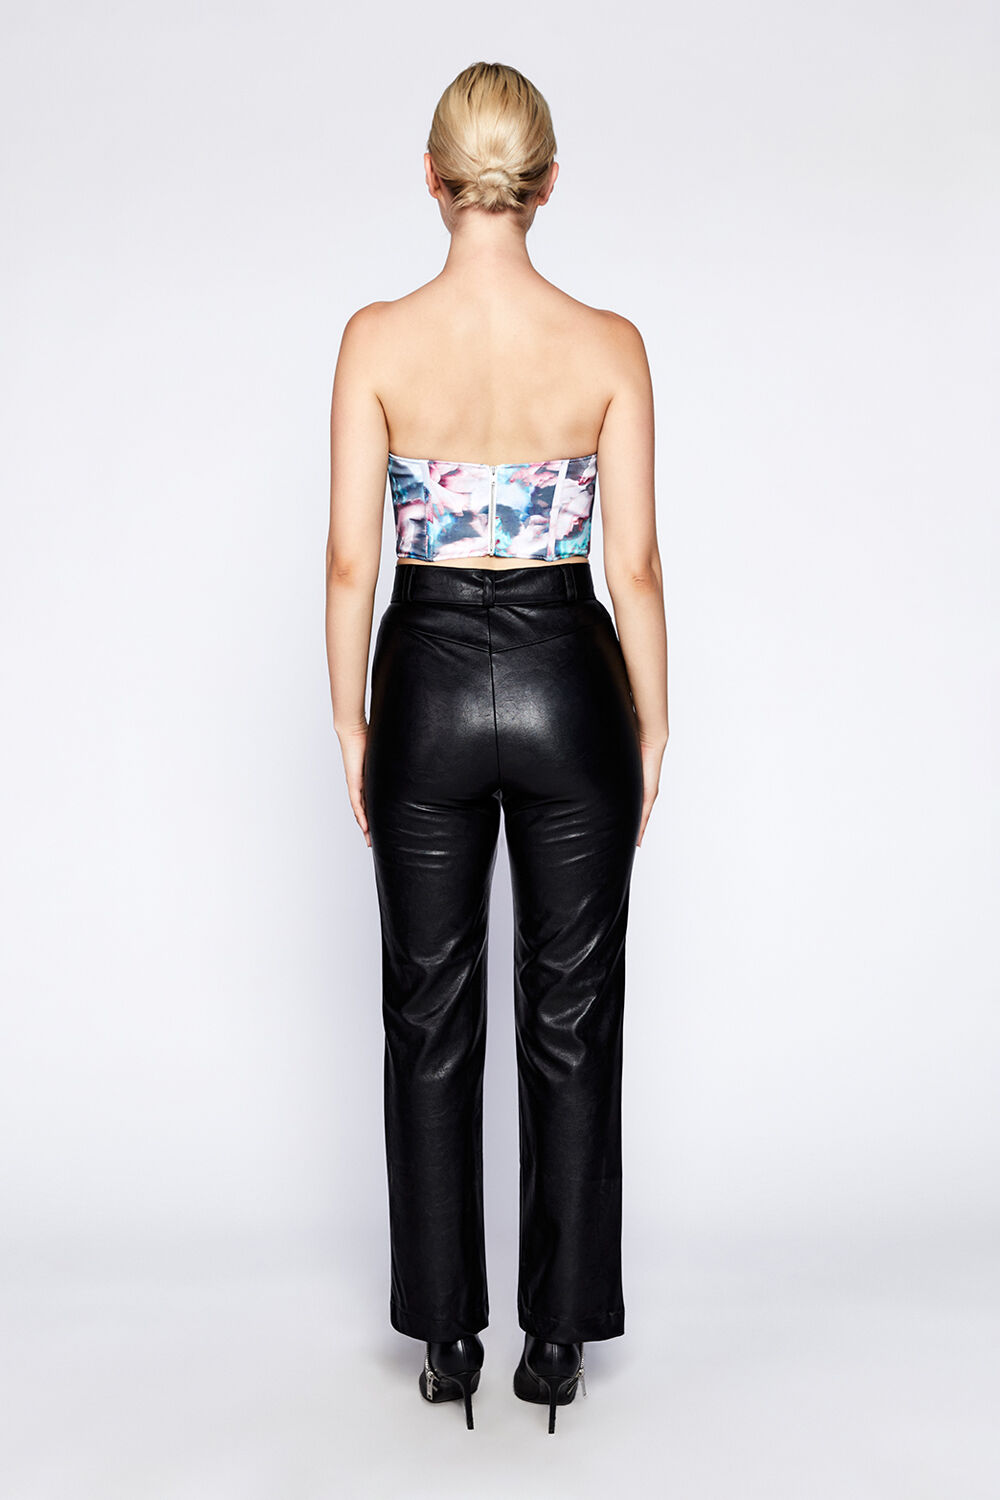 CLEO VEGAN LEATHER PANT in colour CAVIAR